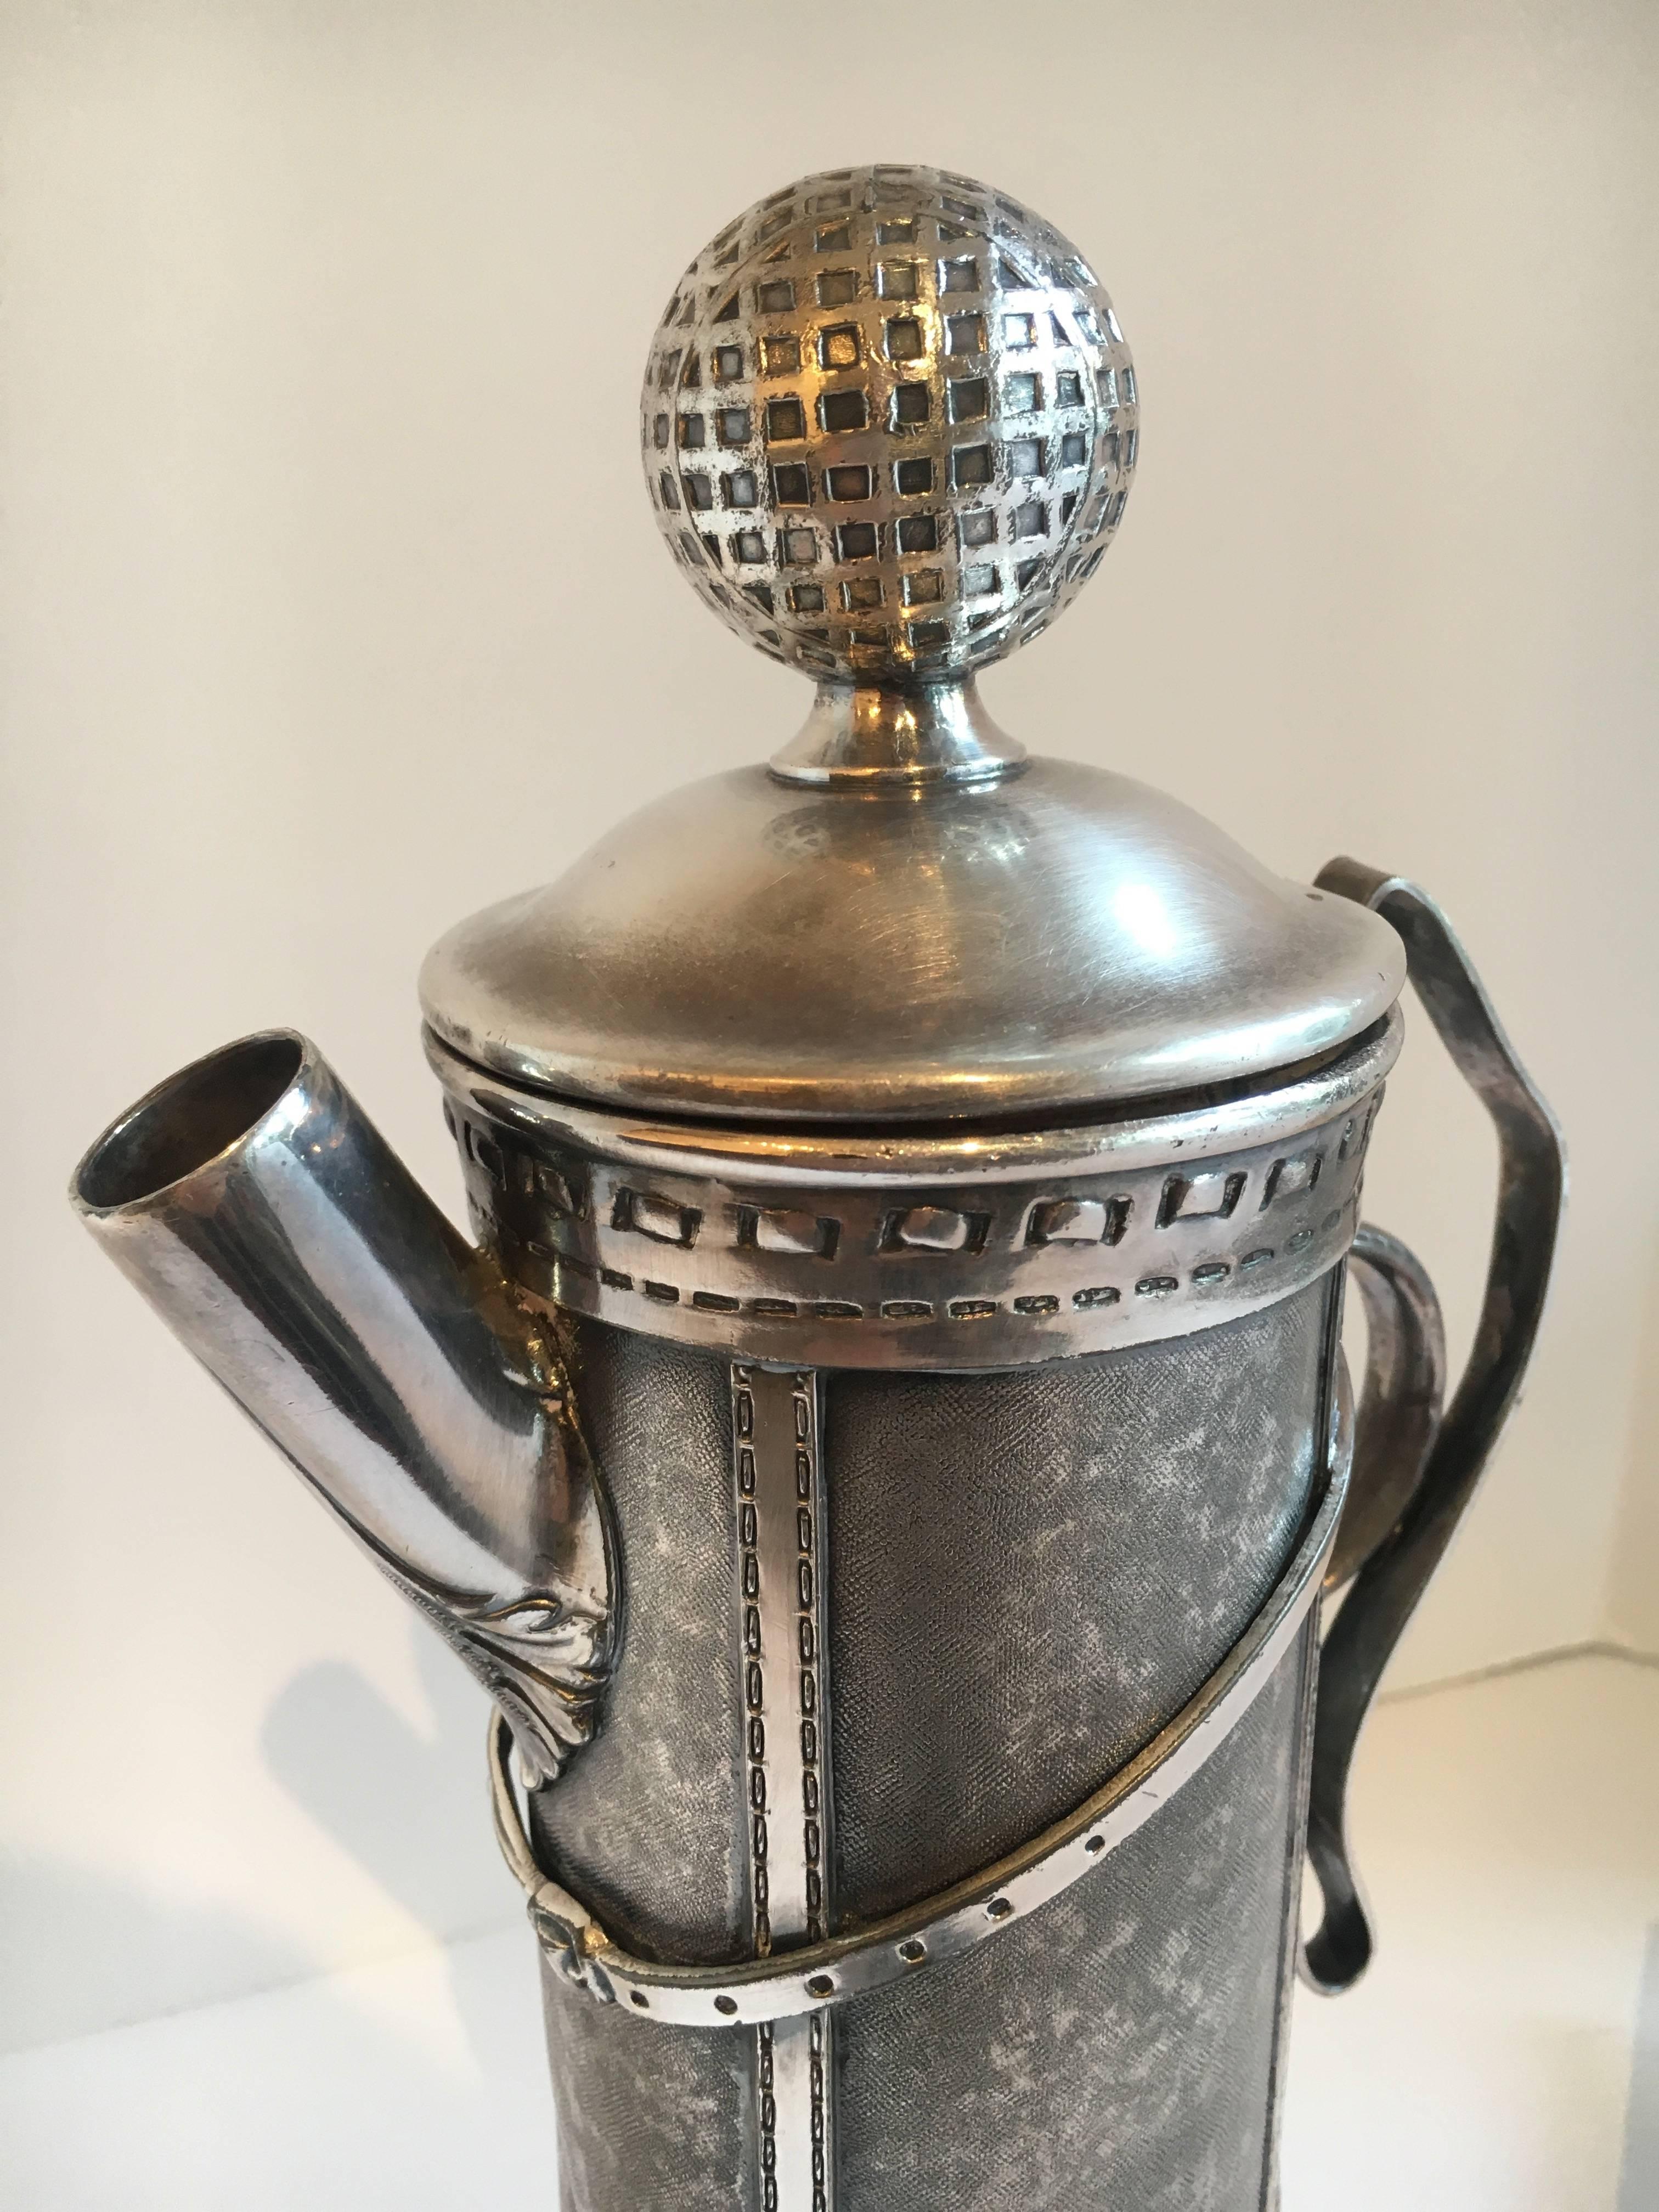 Canadian Art Deco Silver Plate Golf Bag Martini Shaker by George J. Berry